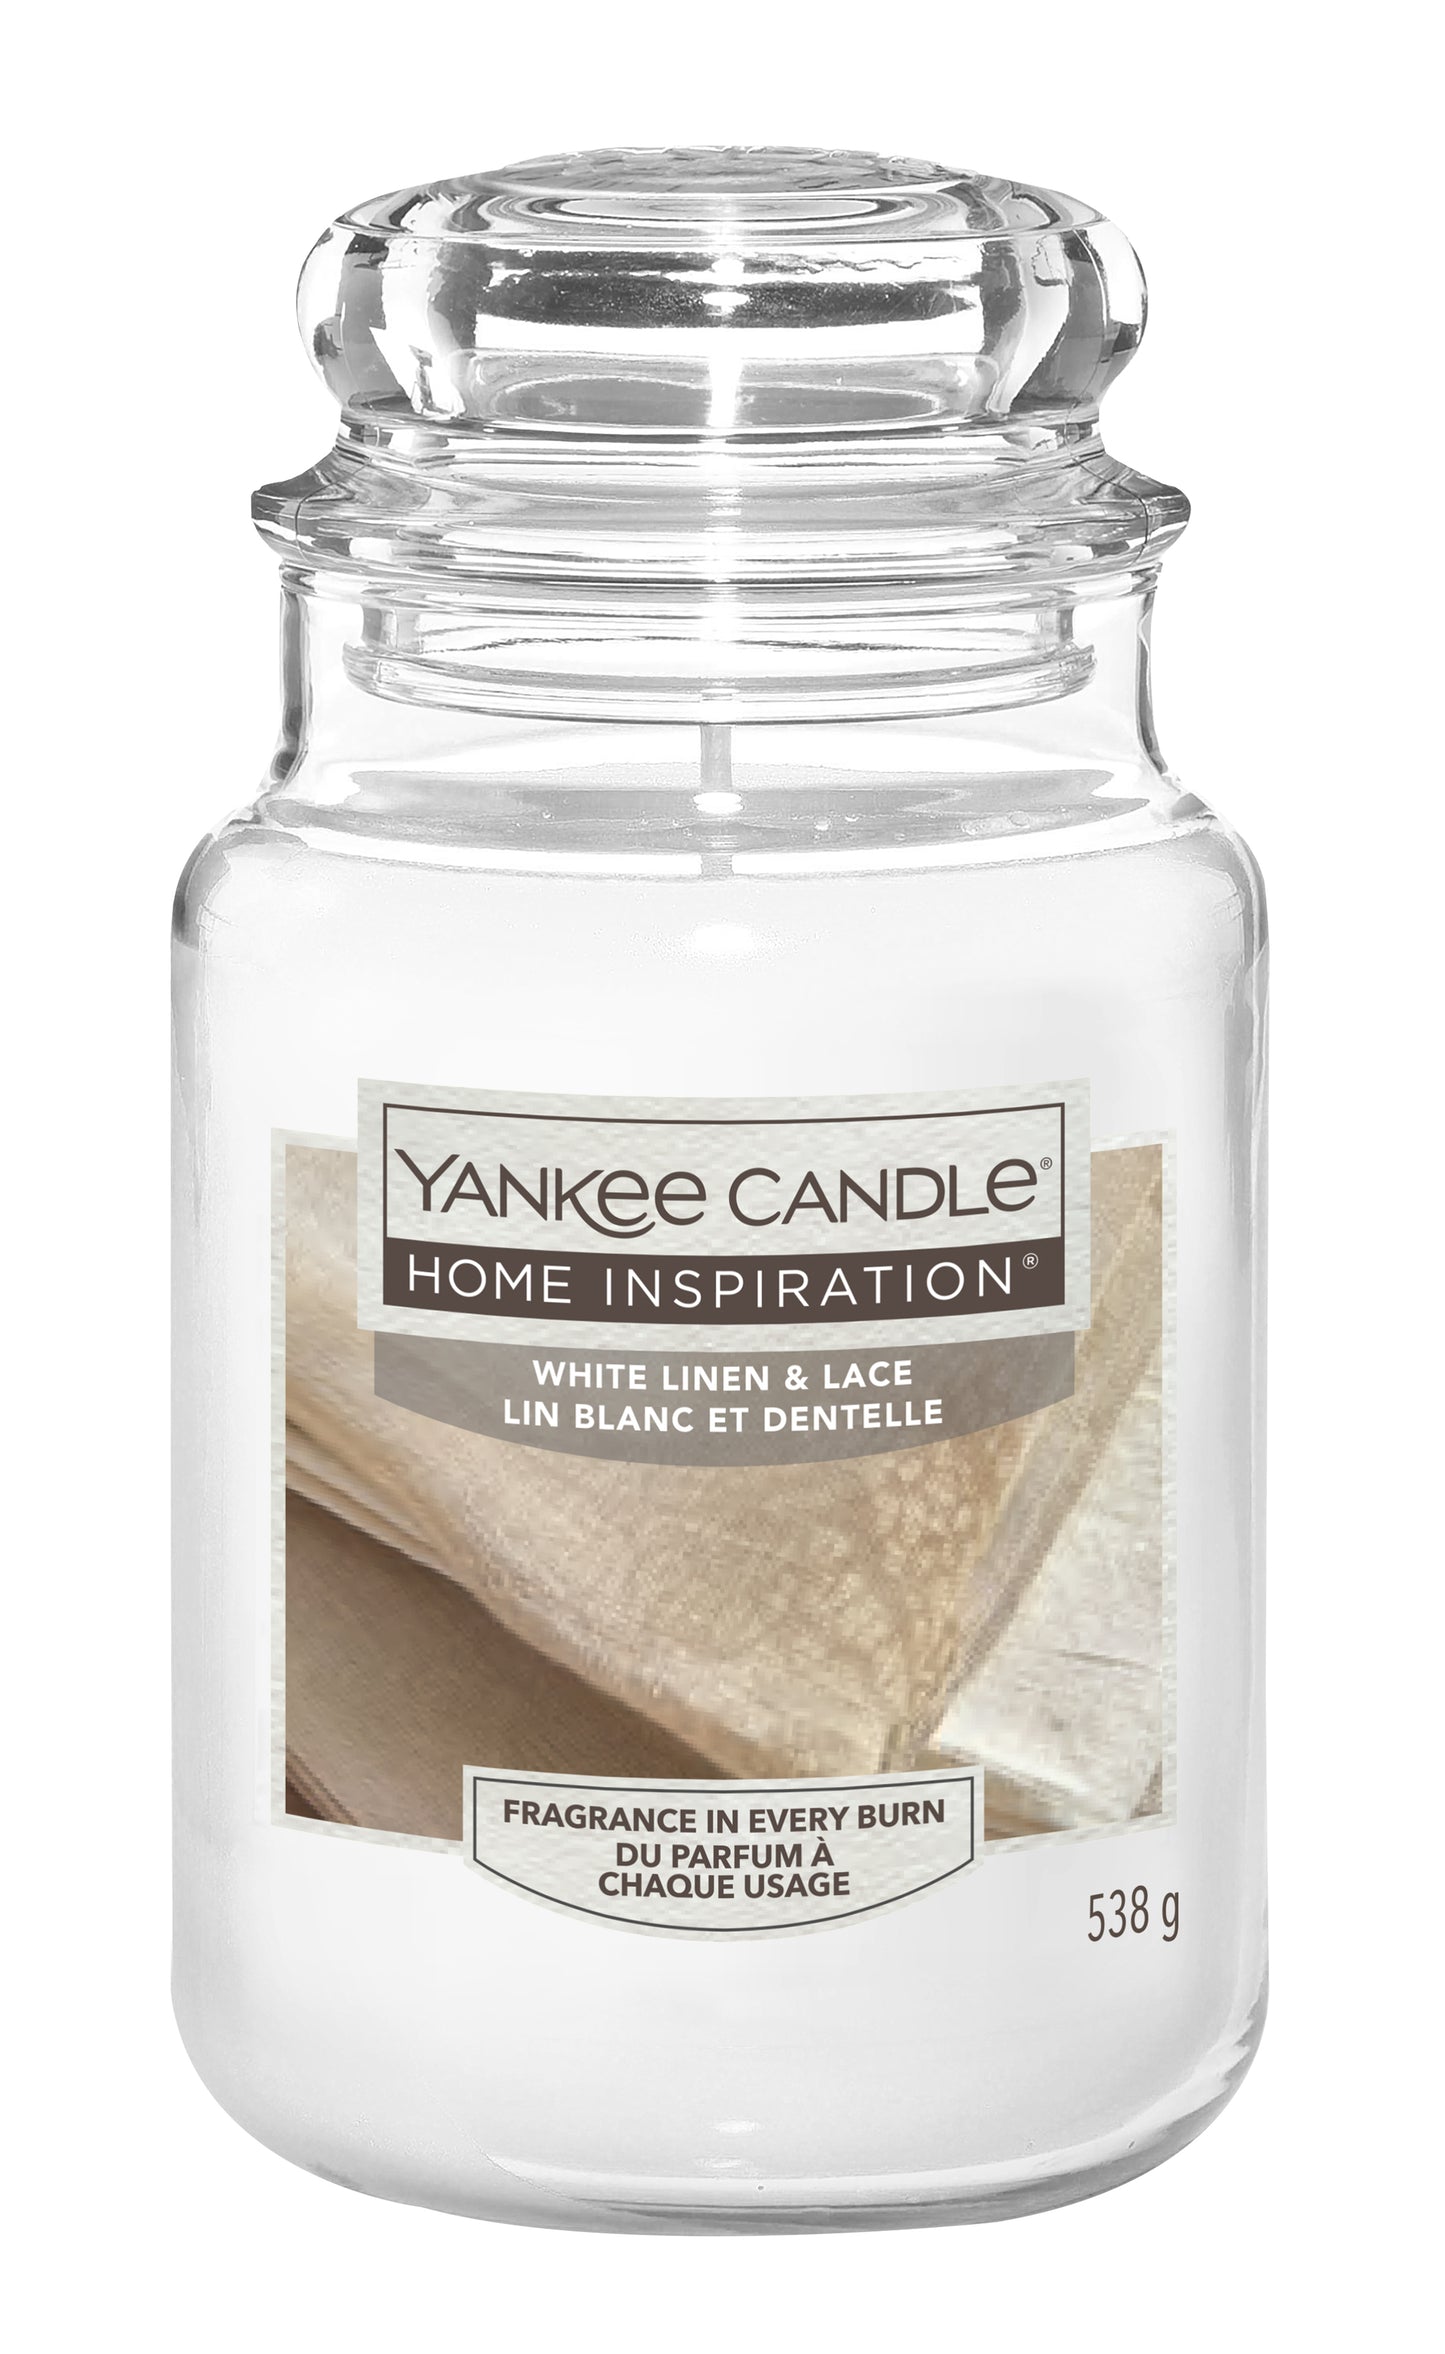 White Linen & Lace Large Jar This elegant fragrance by Yankee Candle® Home Inspiration® features top notes of ozonic breeze, apple blossom, and raspberry leaf; mid notes of iris muguet, ylang petals, and white jasmine.